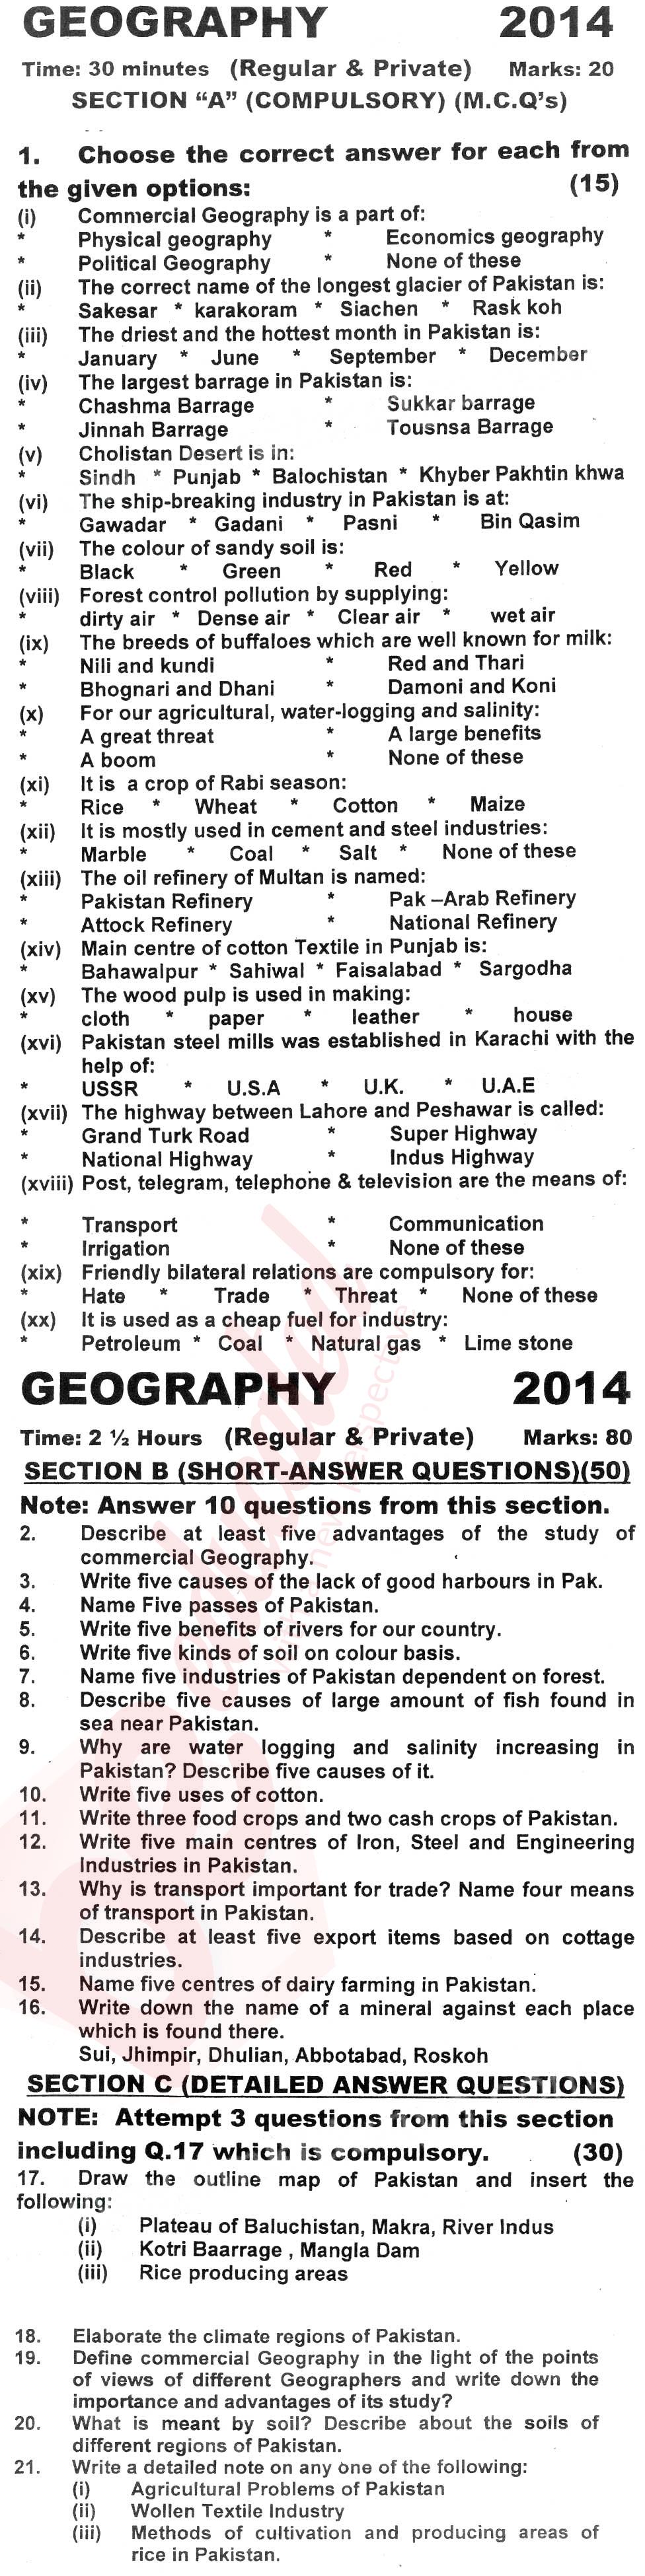 Commercial Geography 10th English Medium Past Paper Group 1 KPBTE 2014